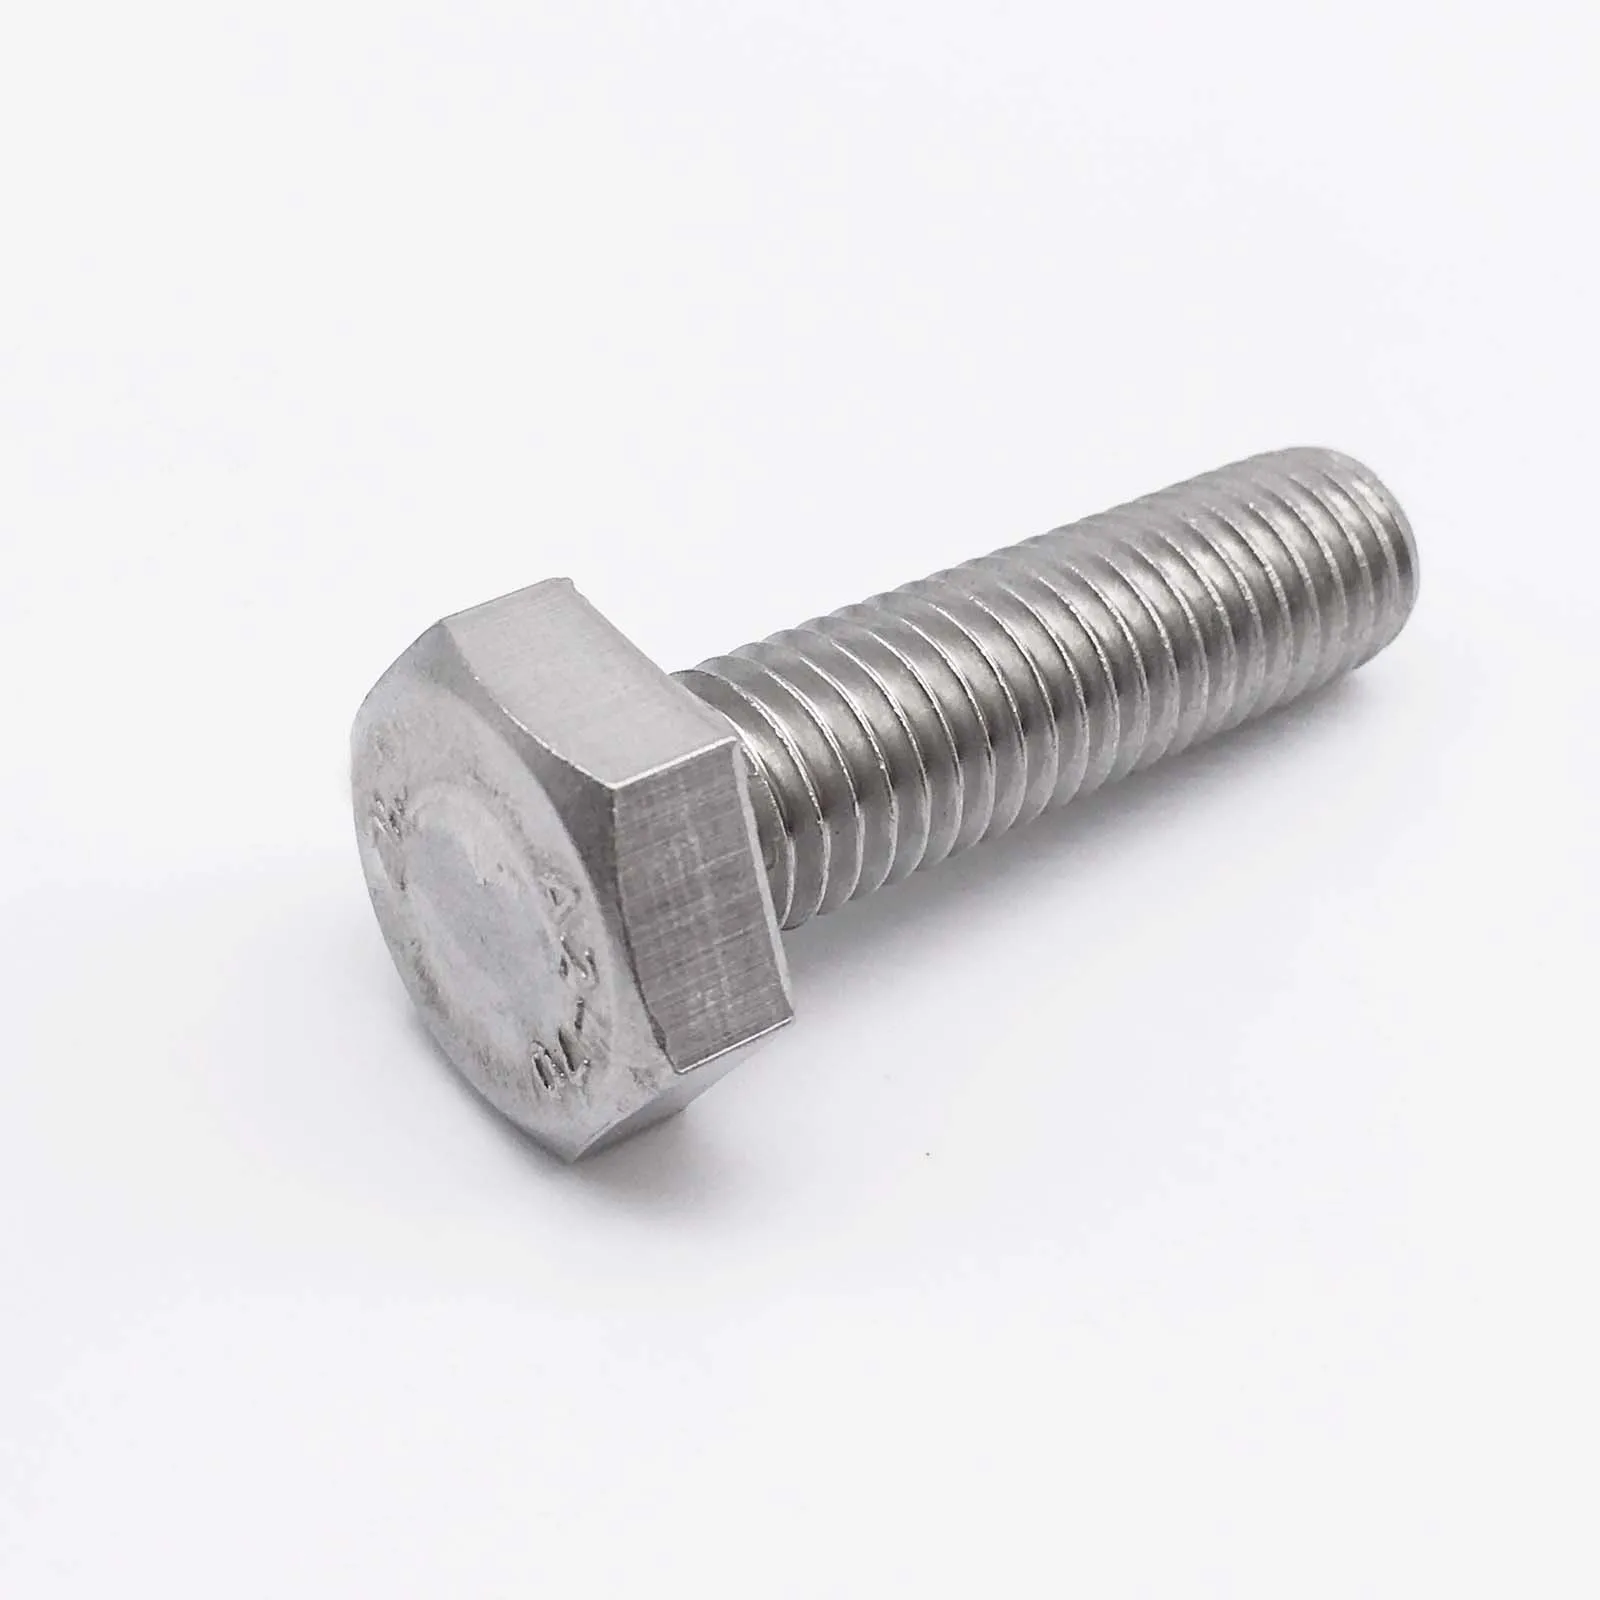 Over 40mm A2/ 304 Stainless Set Screw Hex Head M6 DIN fully threaded bolt 